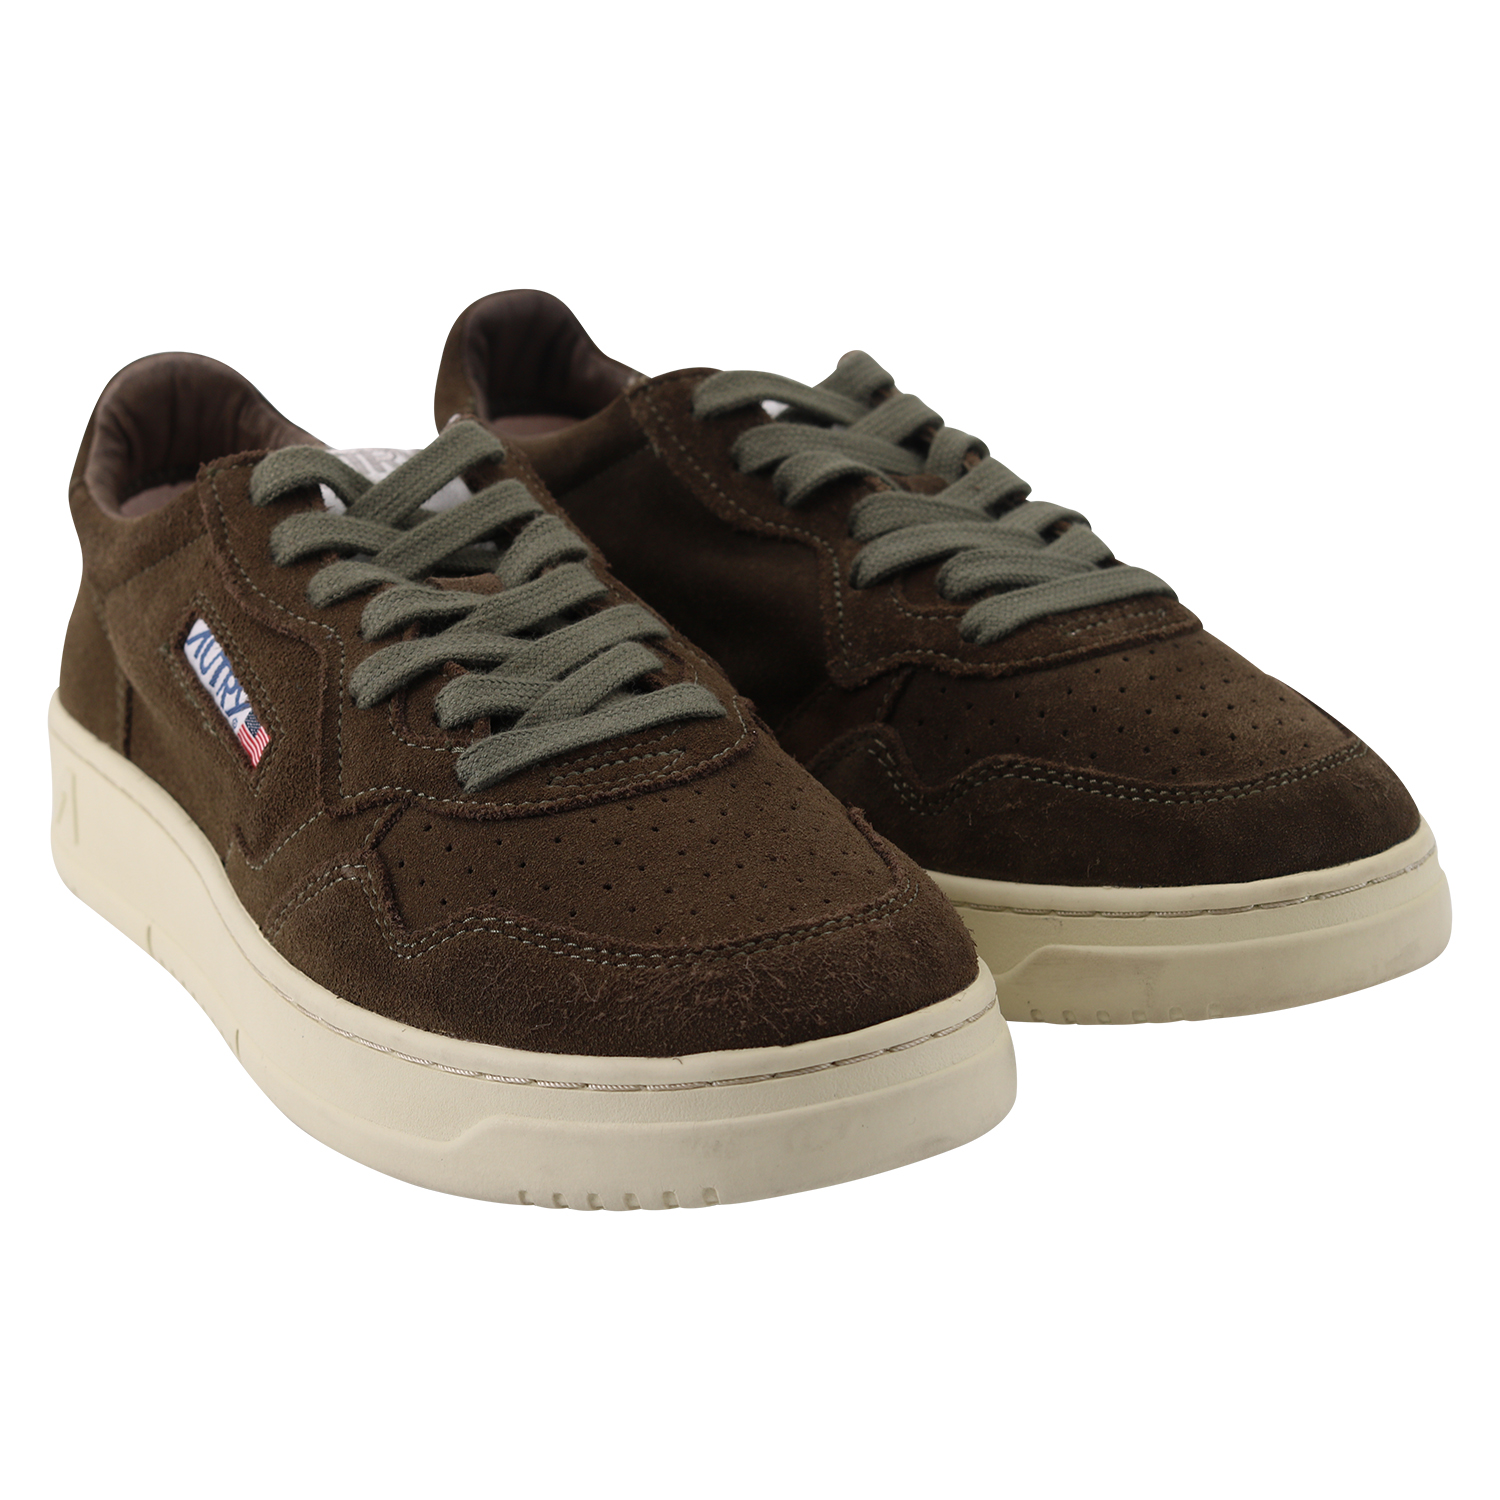 Autry Action Shoes Vintage Sneaker Suede Military